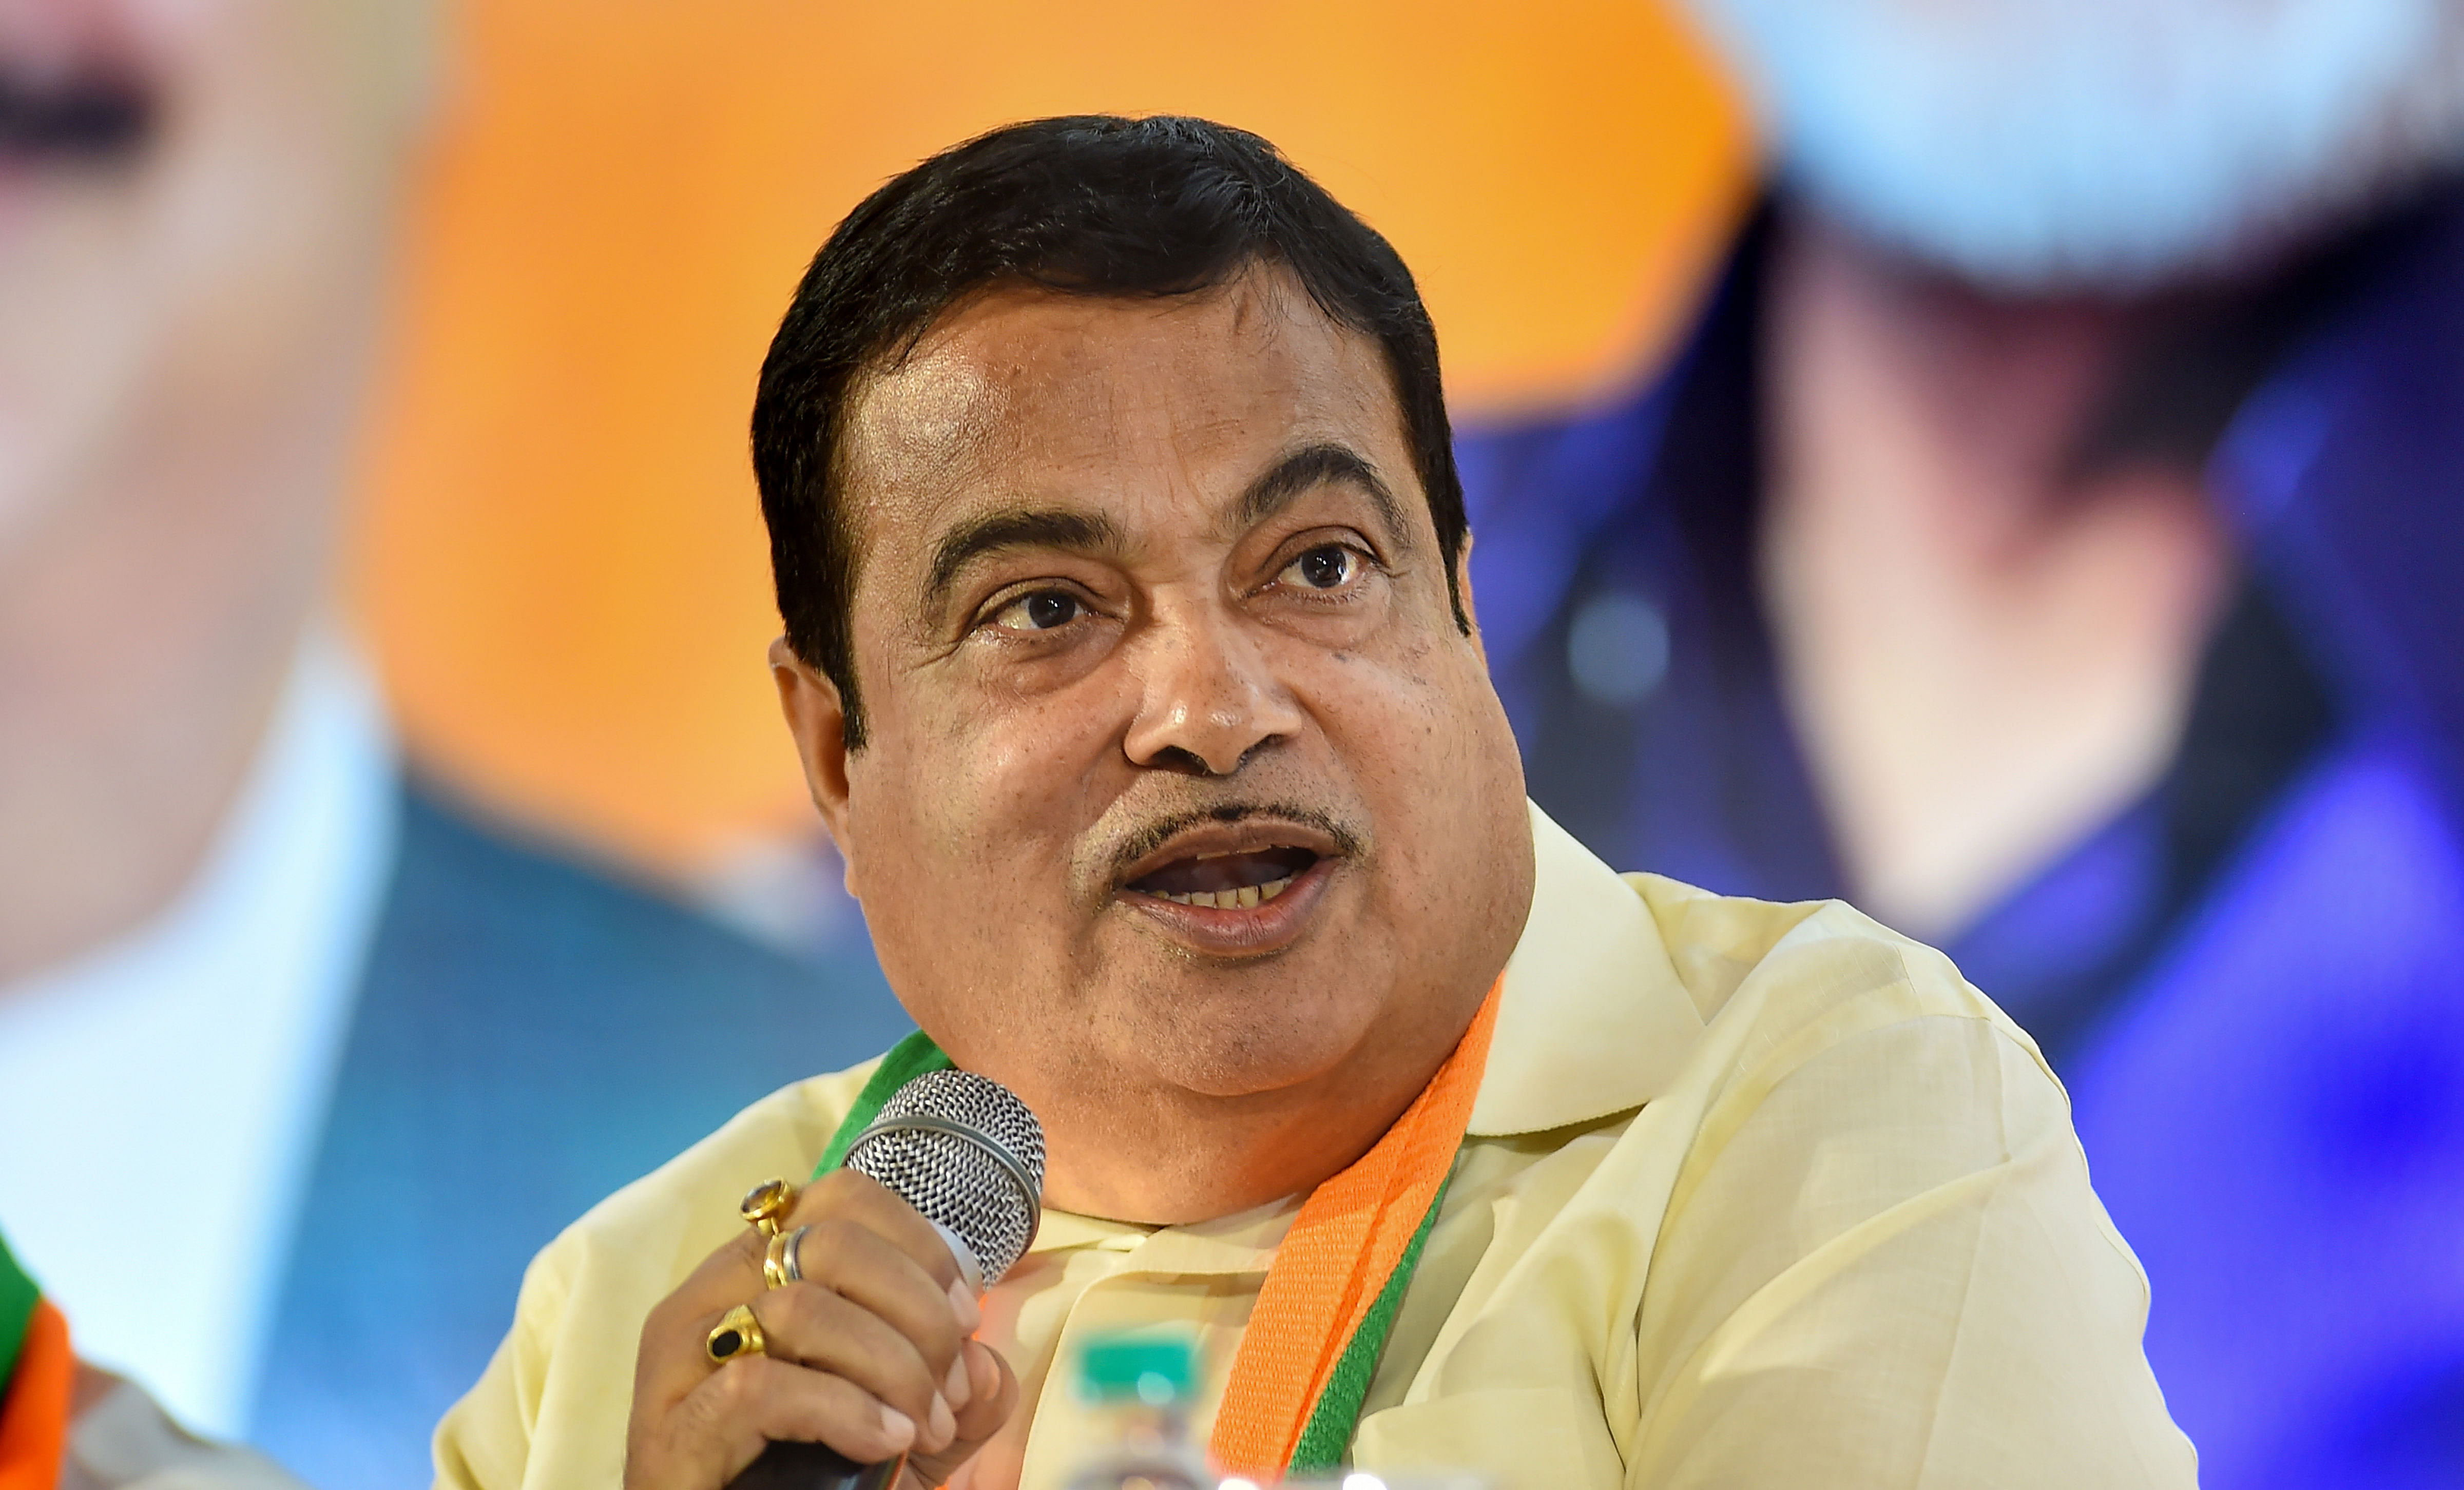 Union Minister for Road, Transport and Highways, and BJP senior leader, Nitin Gadkari. Credit: PTI Photo